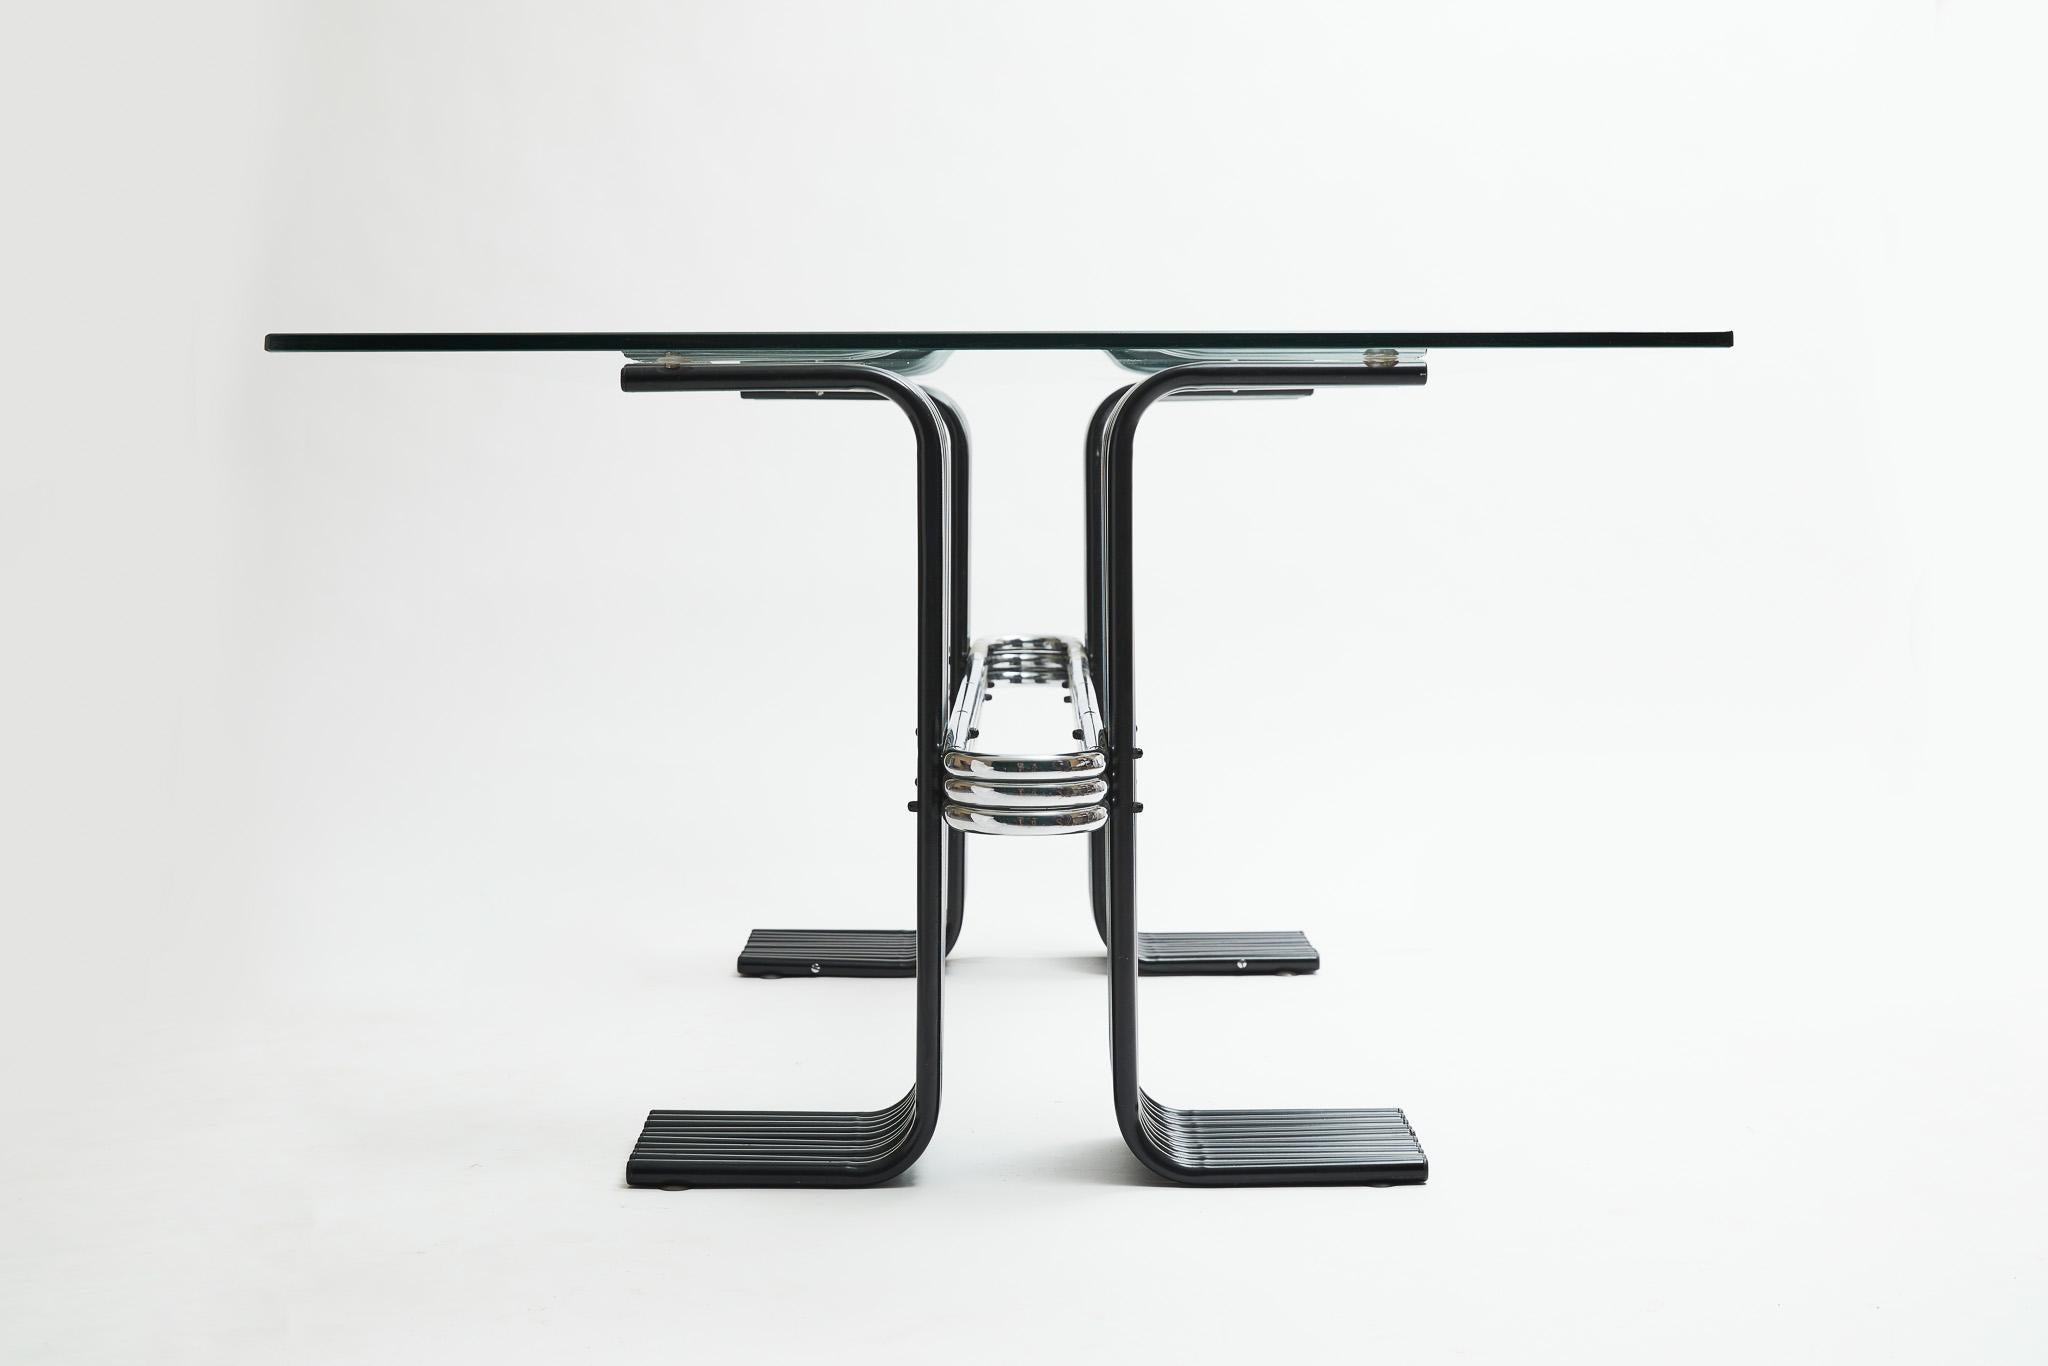 Mid-Century Modern Brazilian Modern Dining Table in Black Painted Iron, Chrome & Glass, Forma, 1970 For Sale